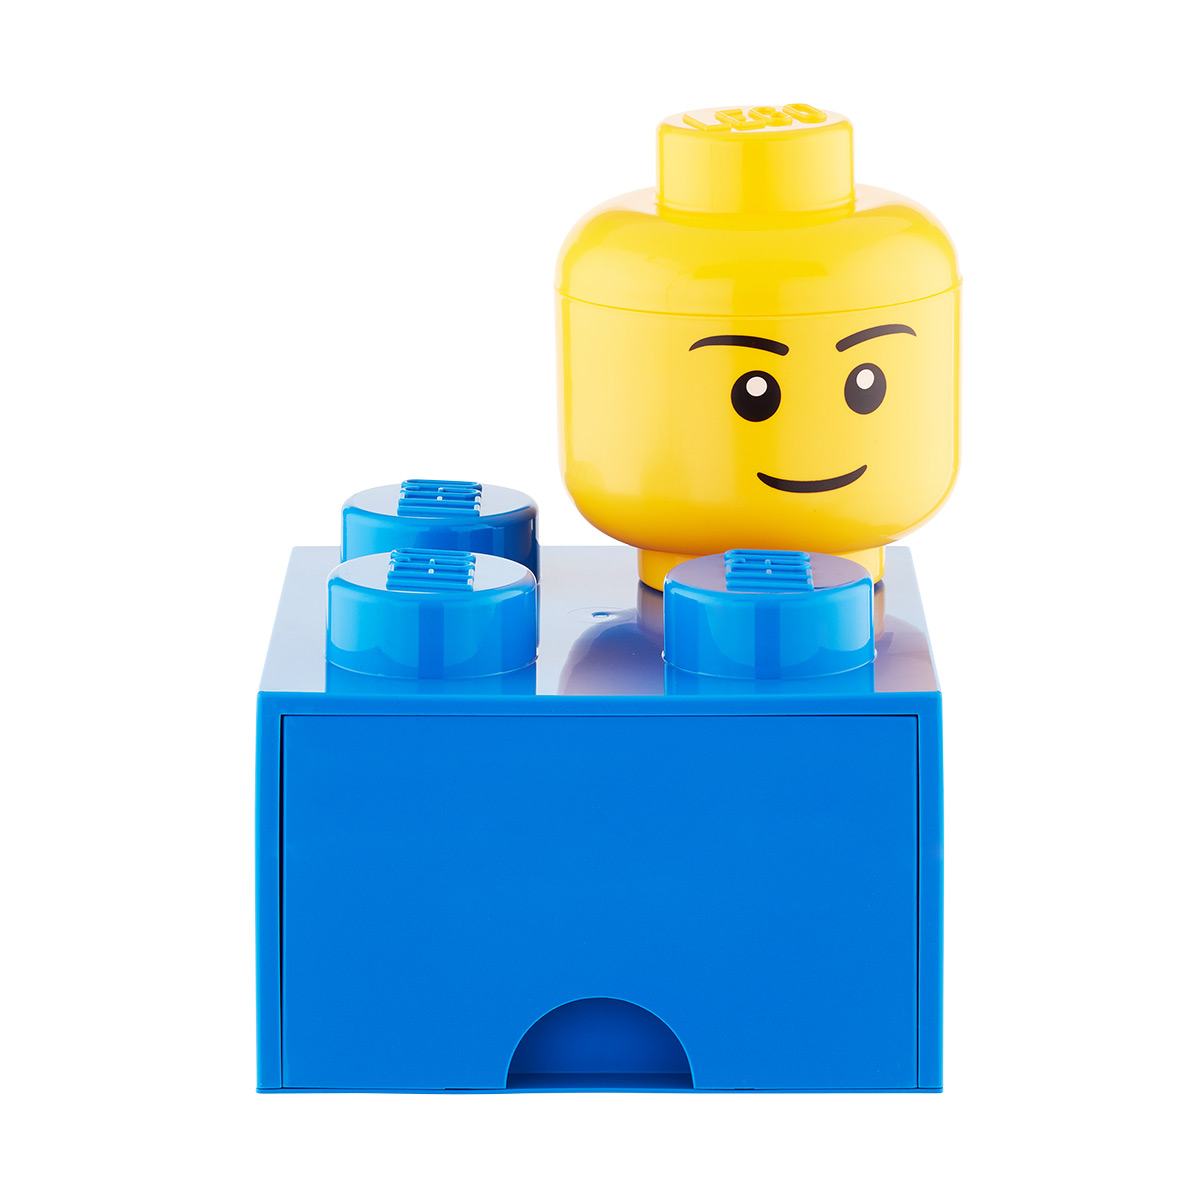 Mor hul At dræbe LEGO Storage Heads | The Container Store